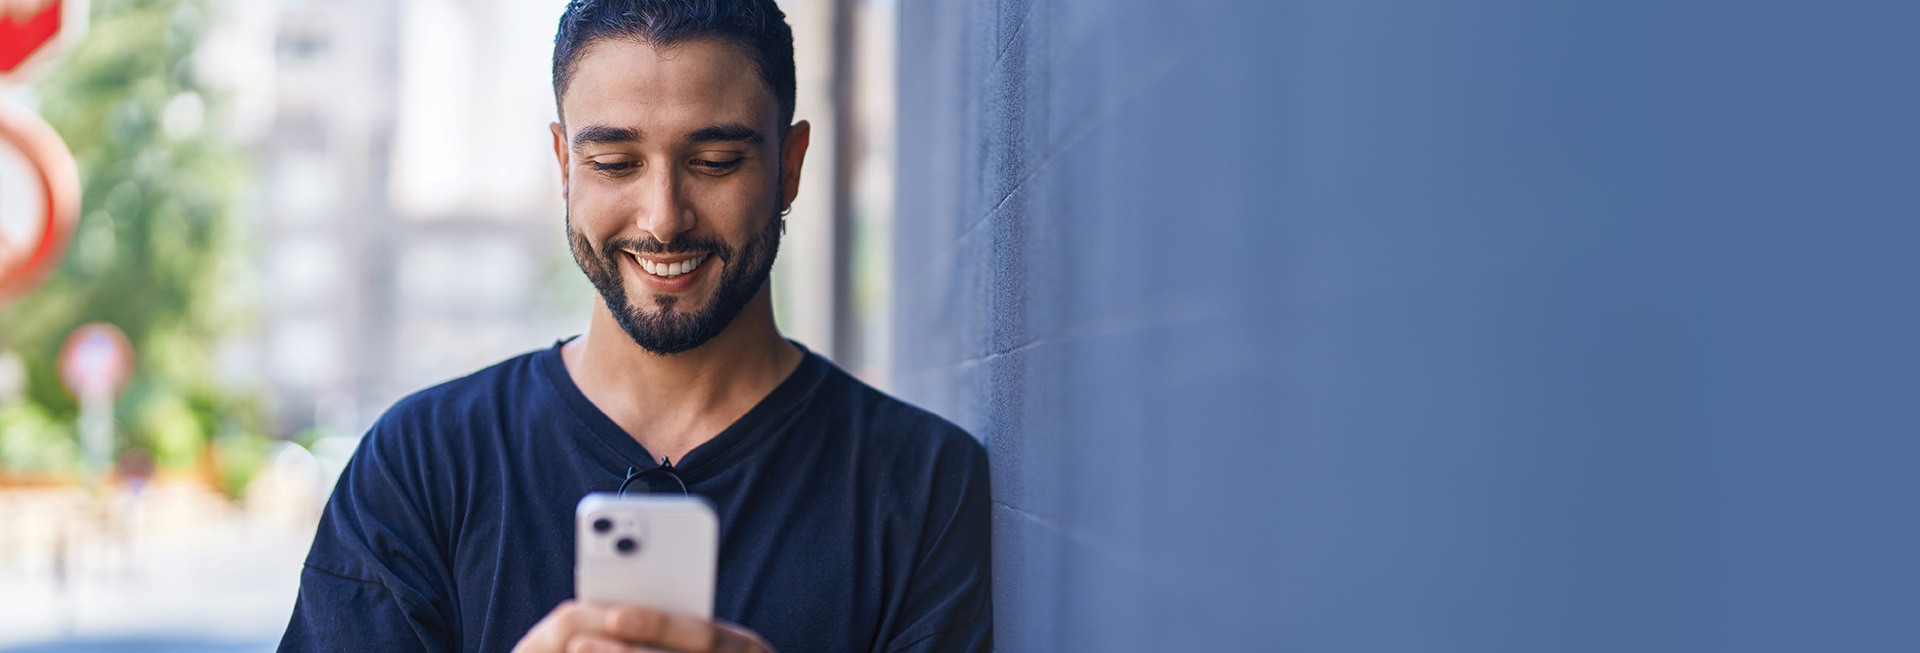 young man smiling at smartphone